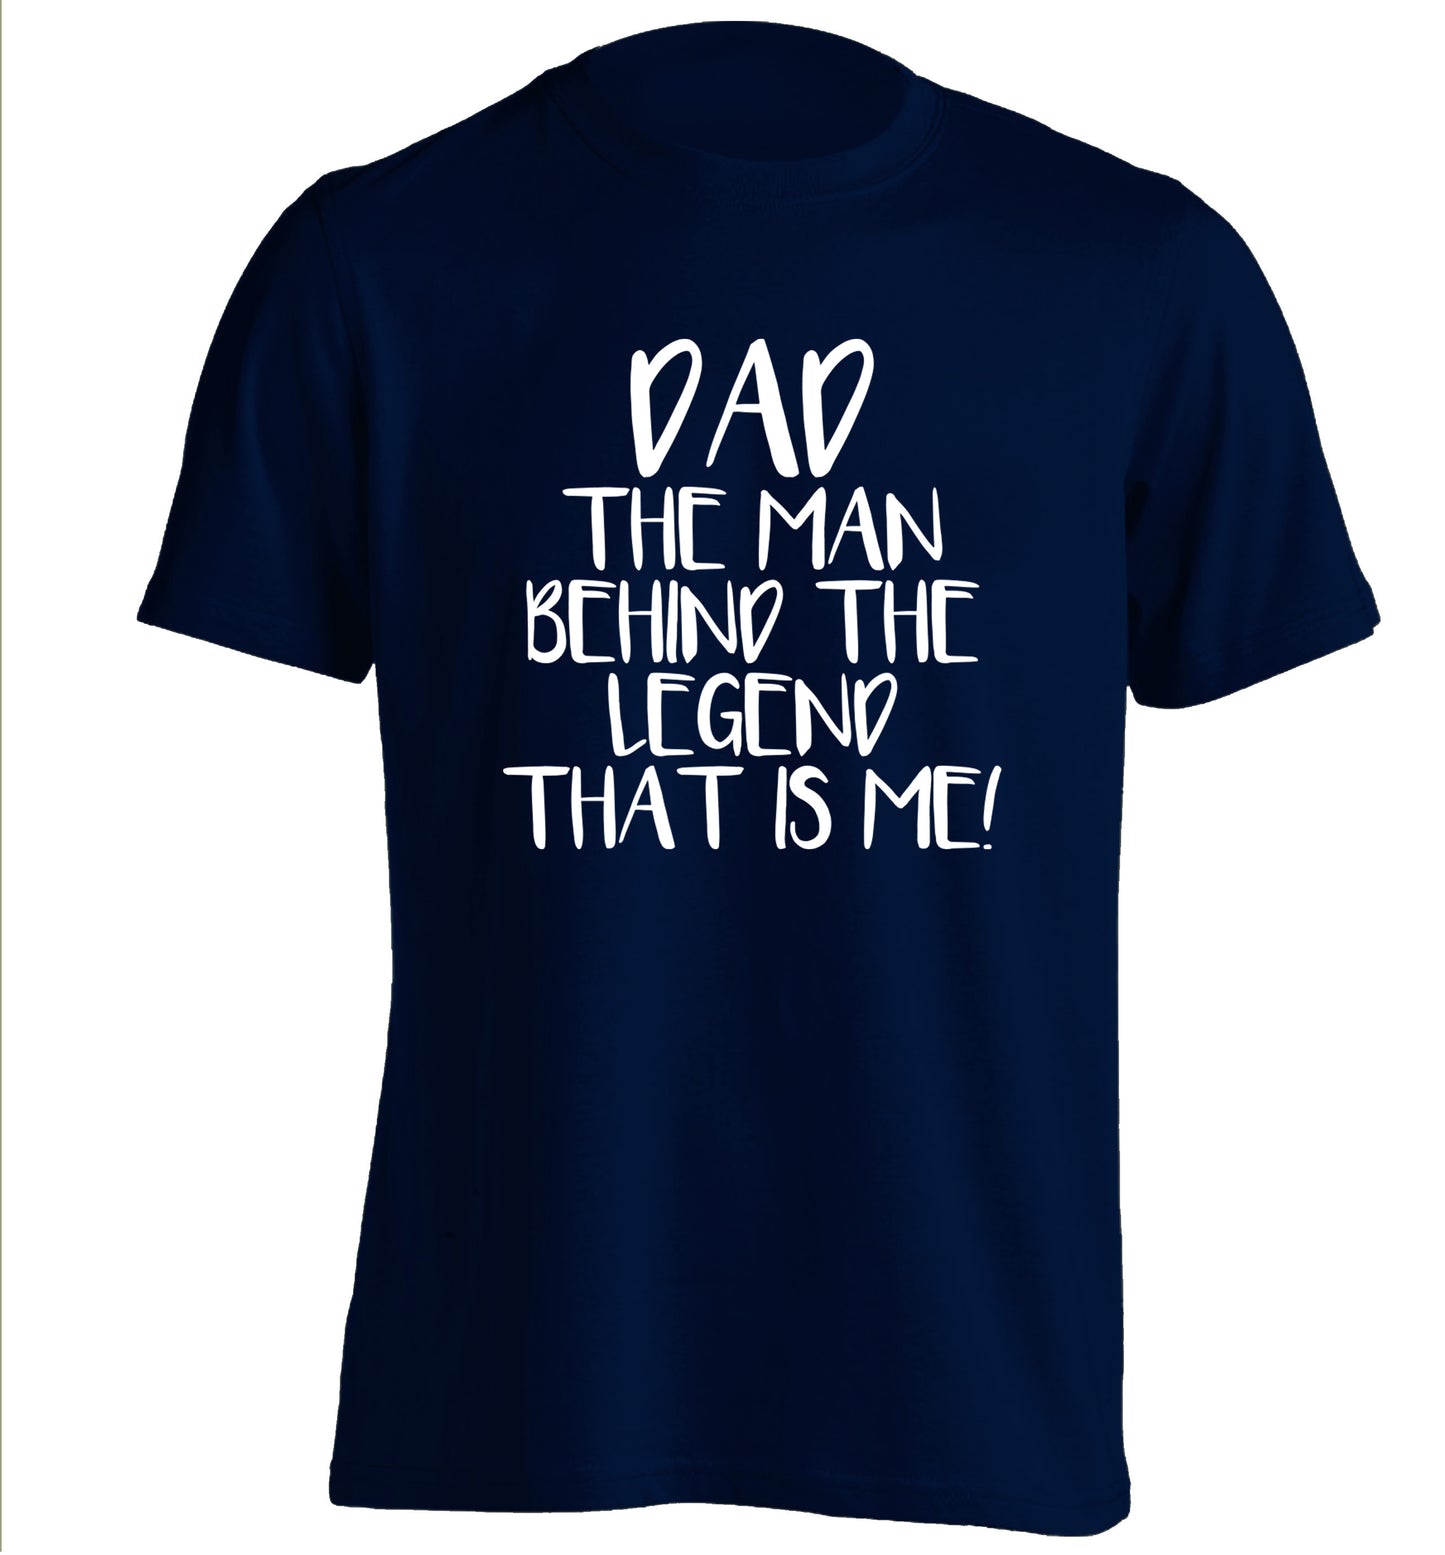 Dad the man behind the legend that is me! adults unisex navy Tshirt 2XL